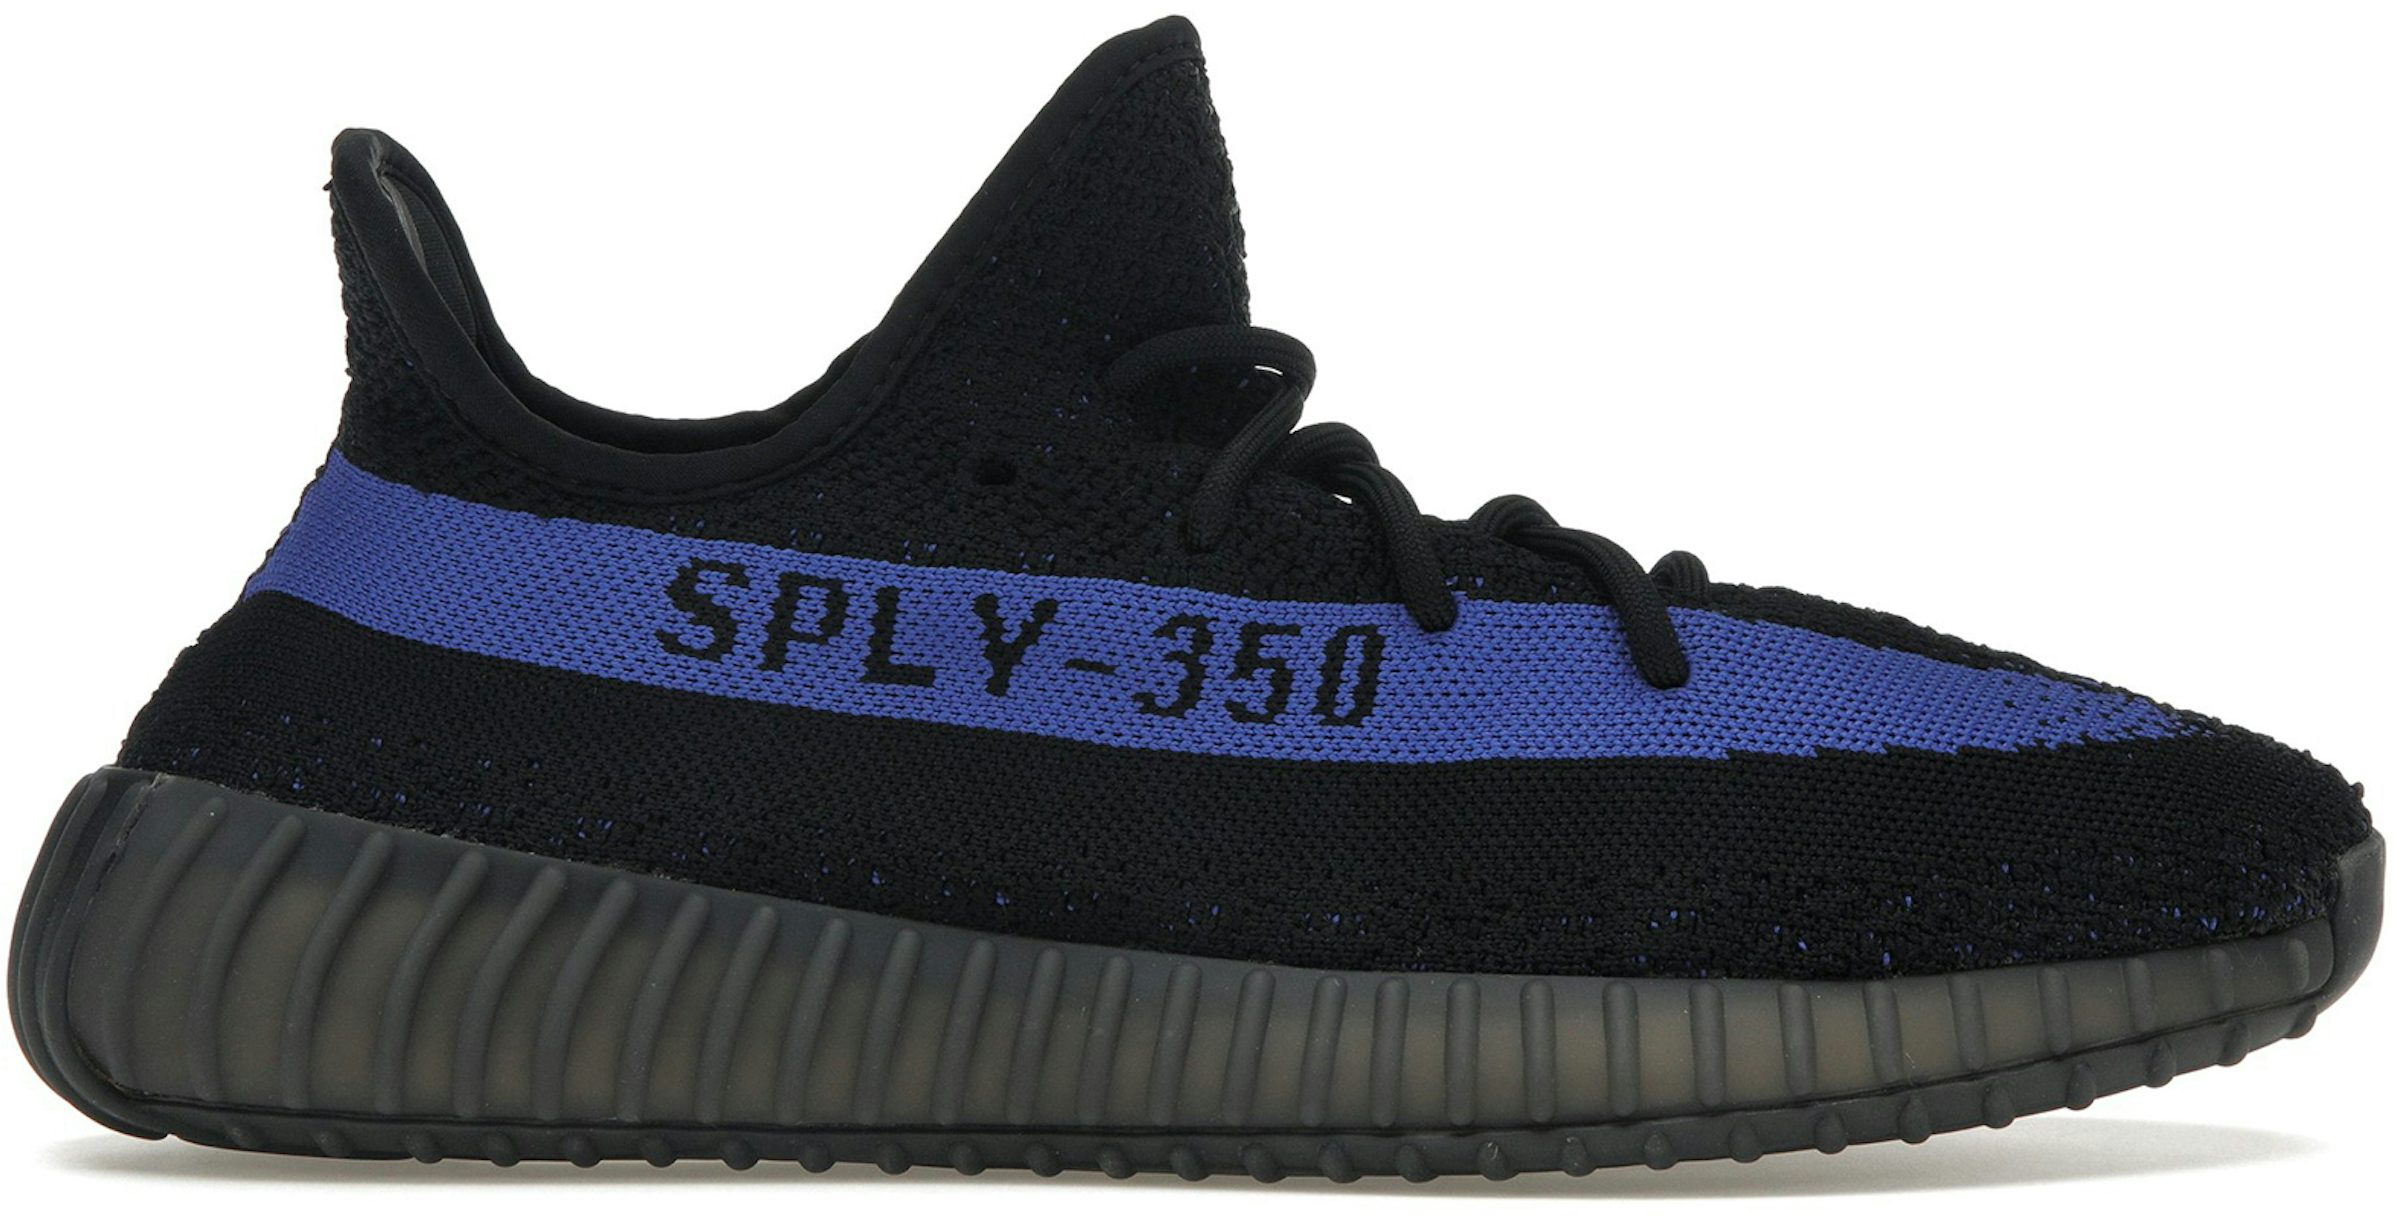 The Ultimate Yeezy 350 Sizing and Fit Guide - Farfetch